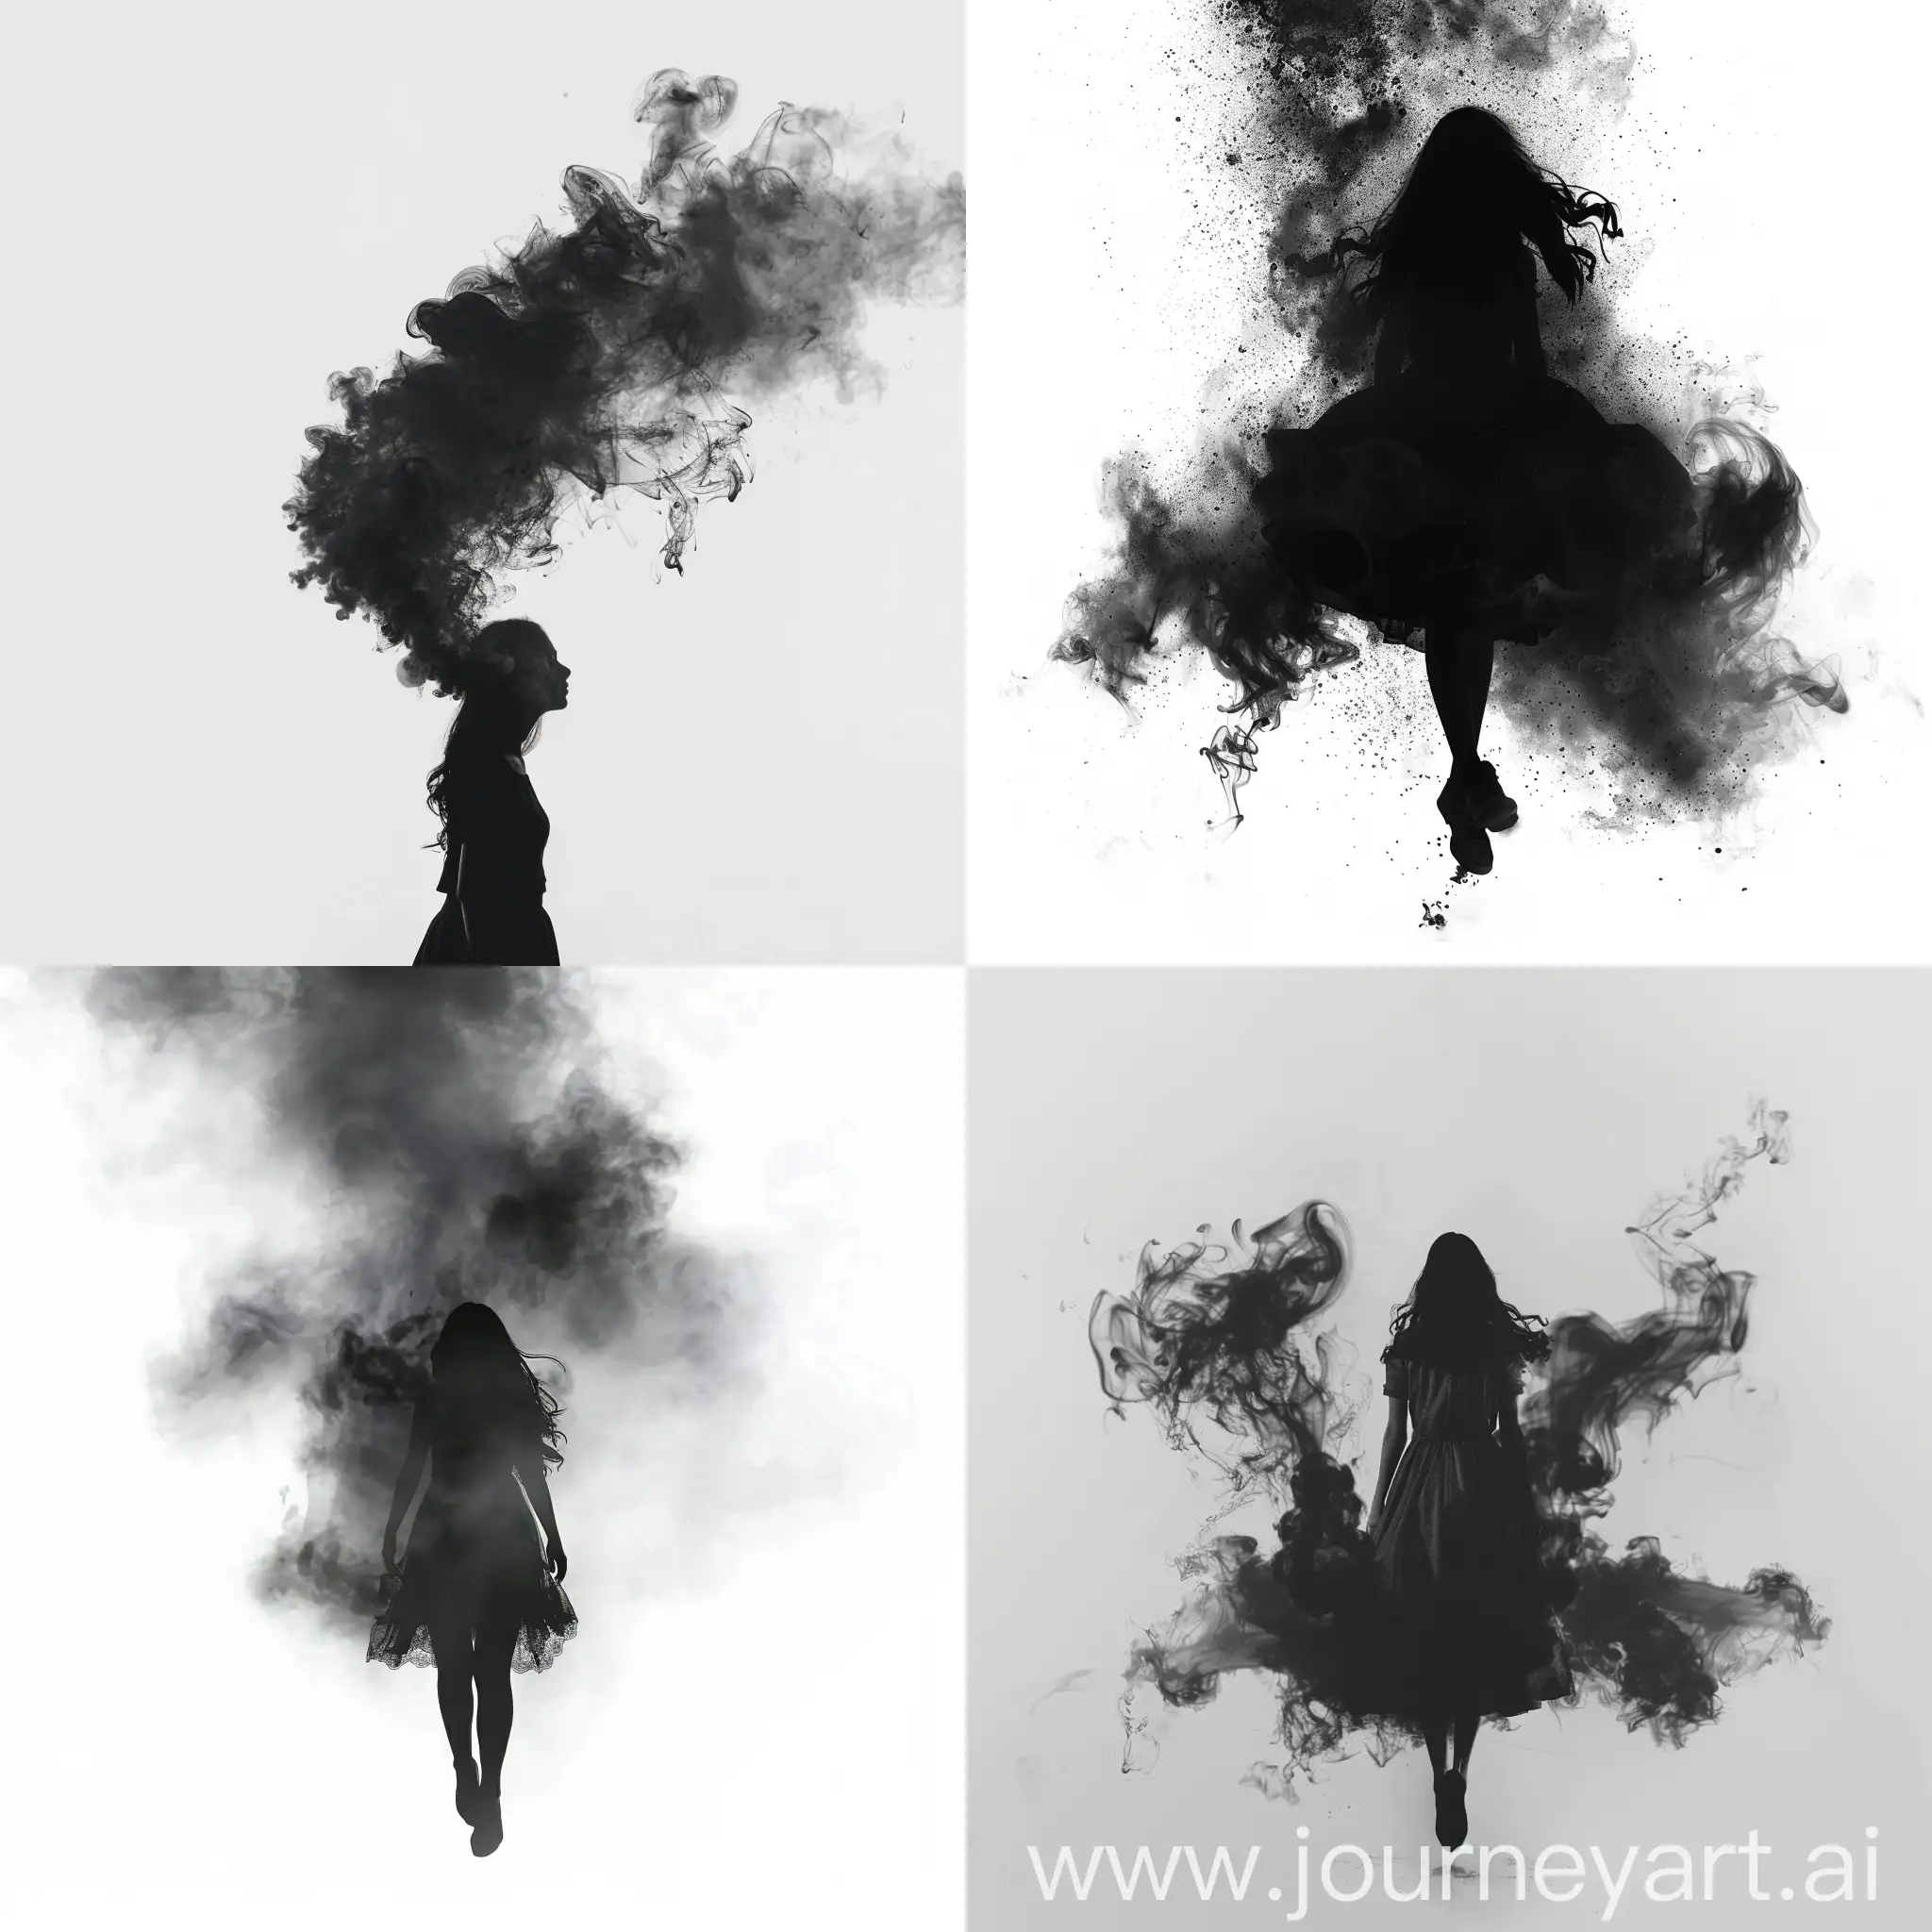 Girls-Shadow-Dissolving-into-Air-on-White-Background